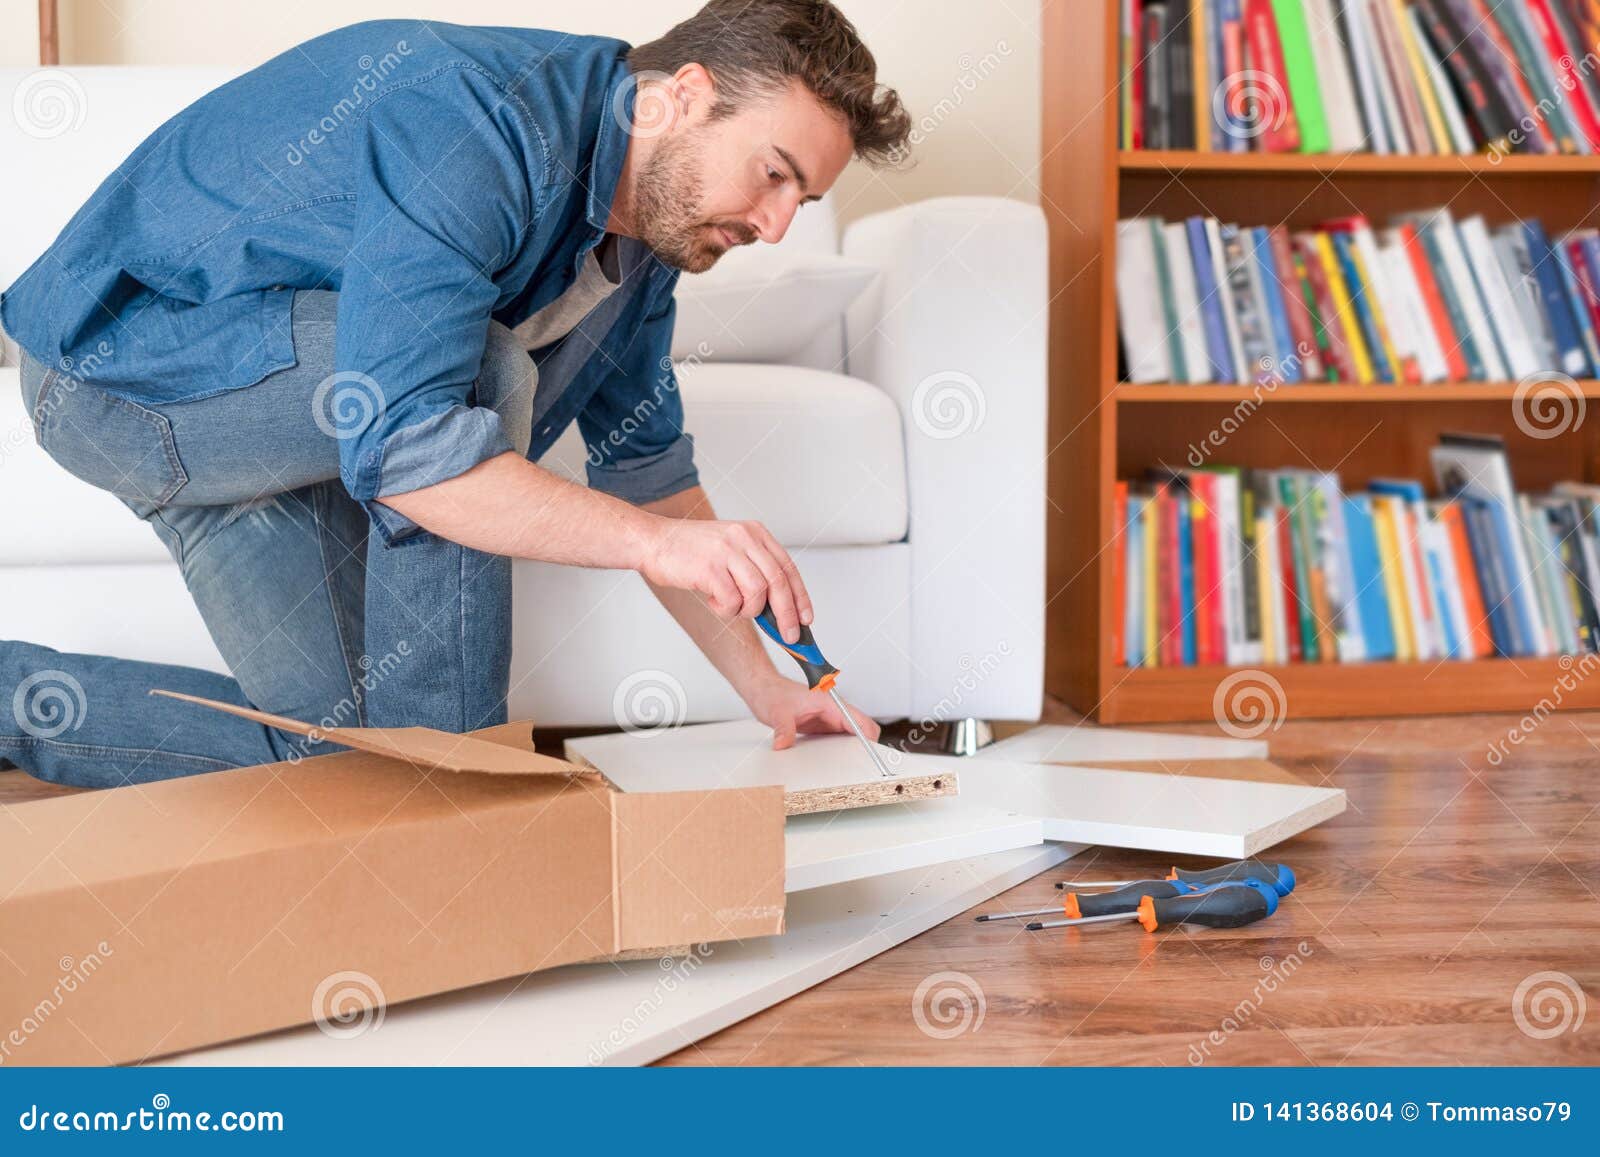 New Home And Man Assembling Furniture Do It Yourself Stock Photo Image Of Carpenter Board